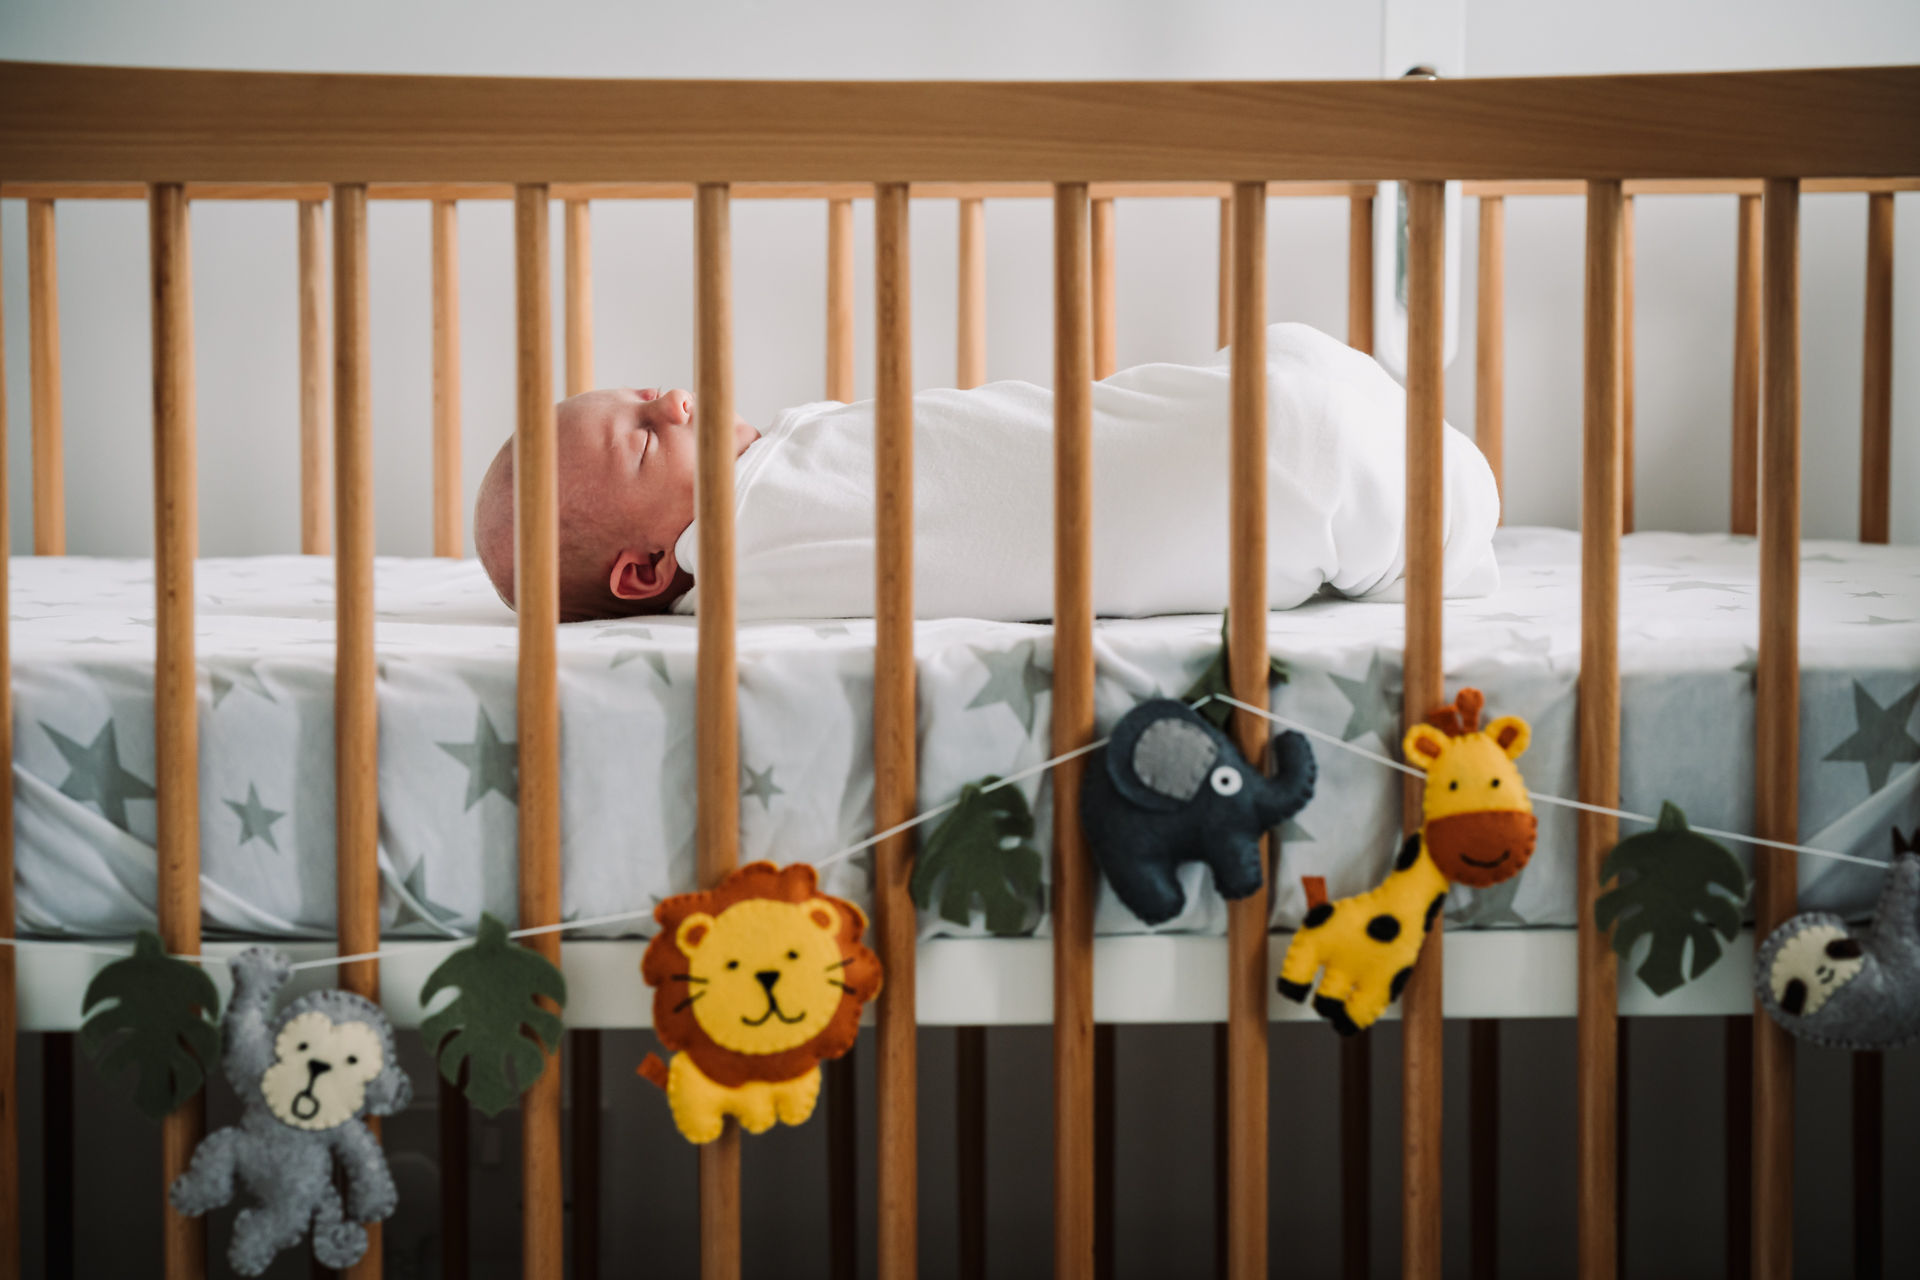 Newborn baby sleeps in her cot amongst soft toys